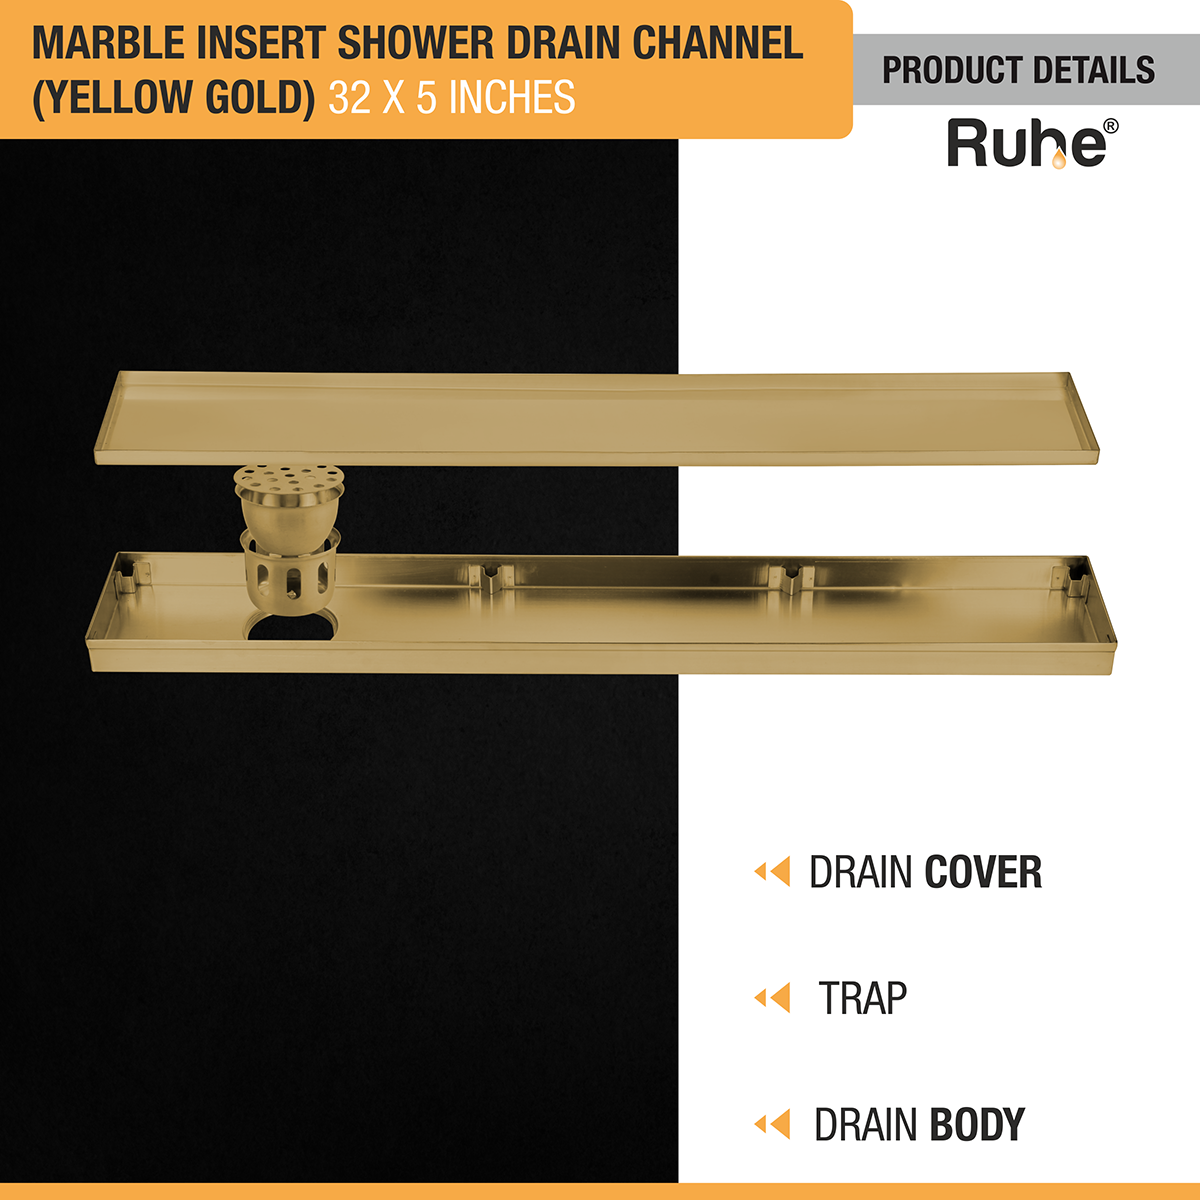 Marble Insert Shower Drain Channel (32 x 5 Inches) YELLOW GOLD PVD Coated with drain cover, trap, and drain body